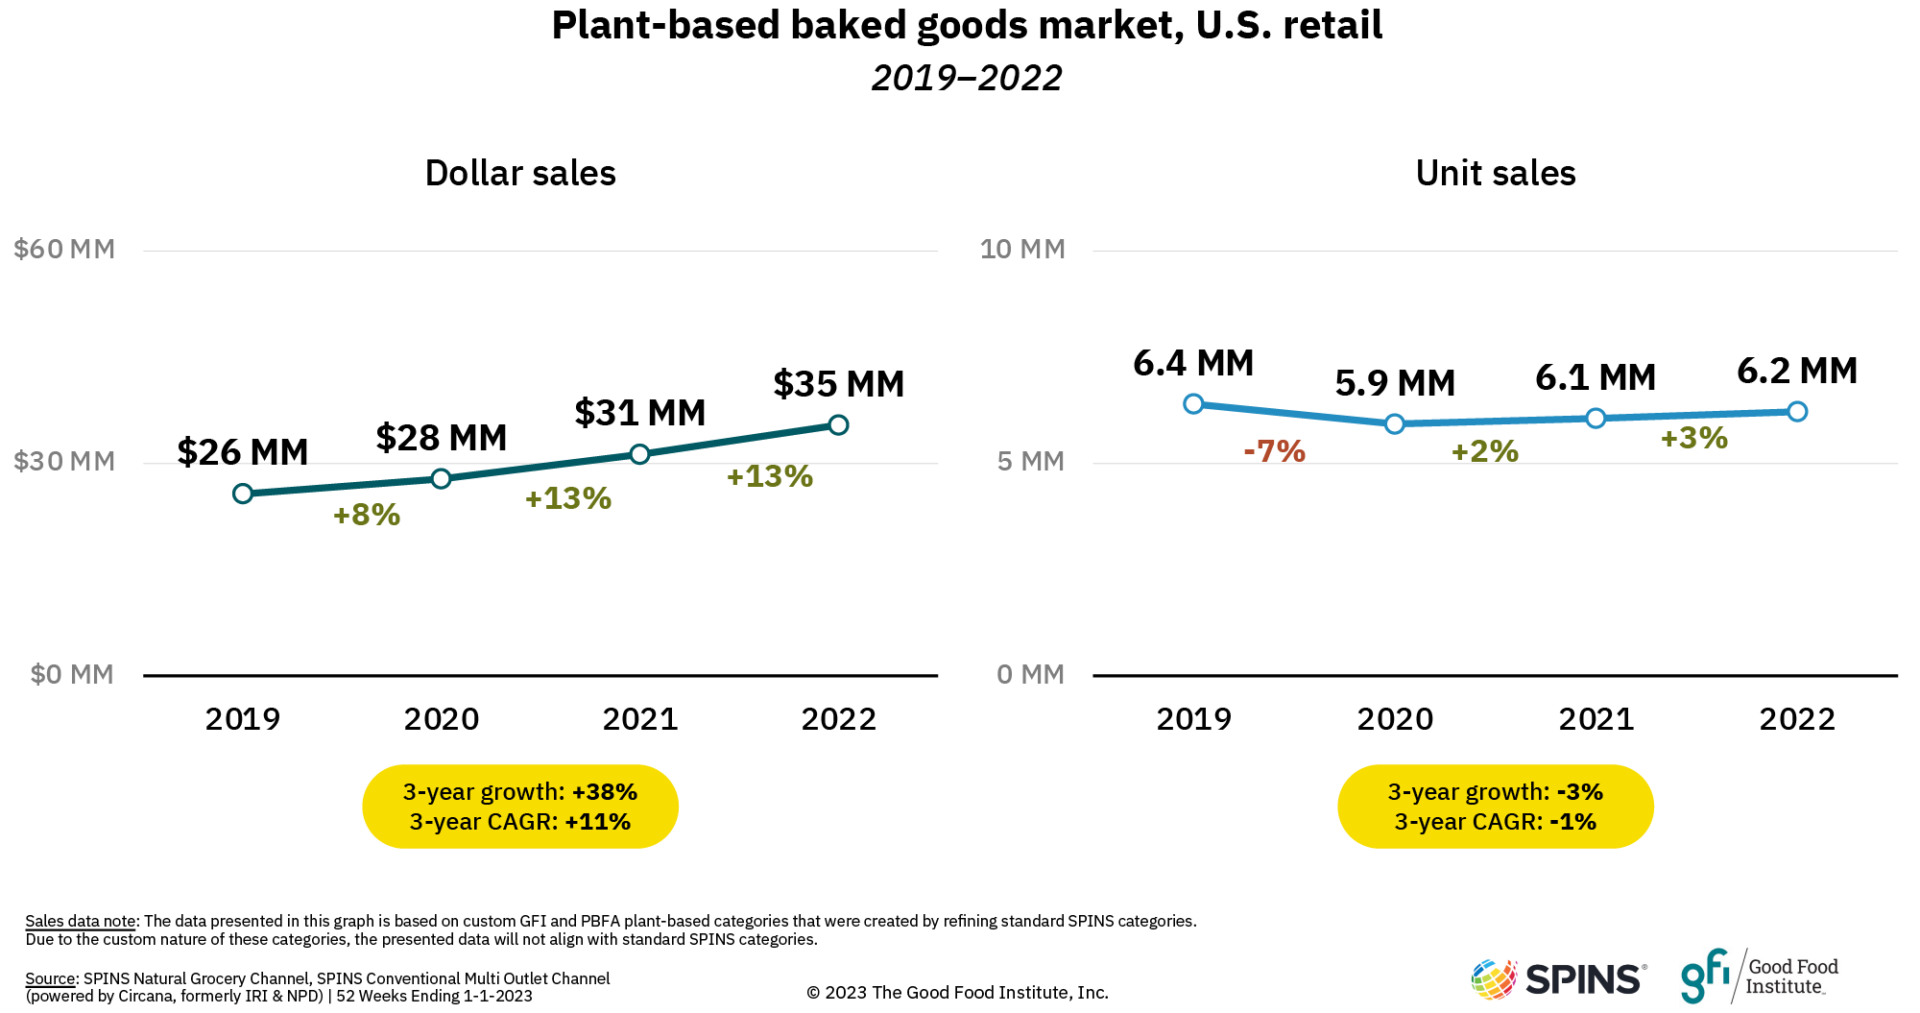 Summary of plant-based baked goods sales data